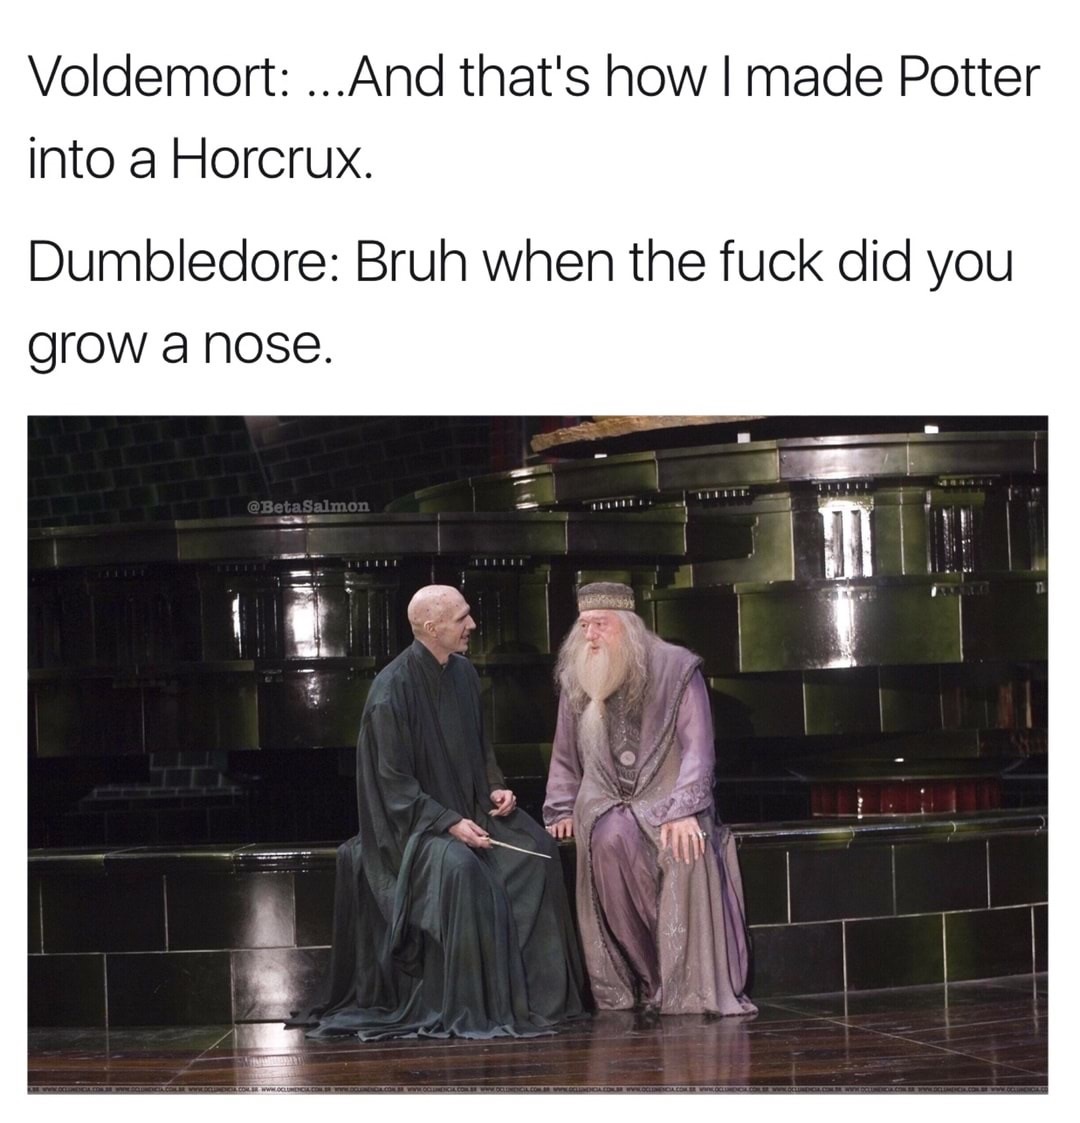 voldemort dumbledore - Voldemort ... And that's how I made Potter into a Horcrux. Dumbledore Bruh when the fuck did you grow a nose. Gol